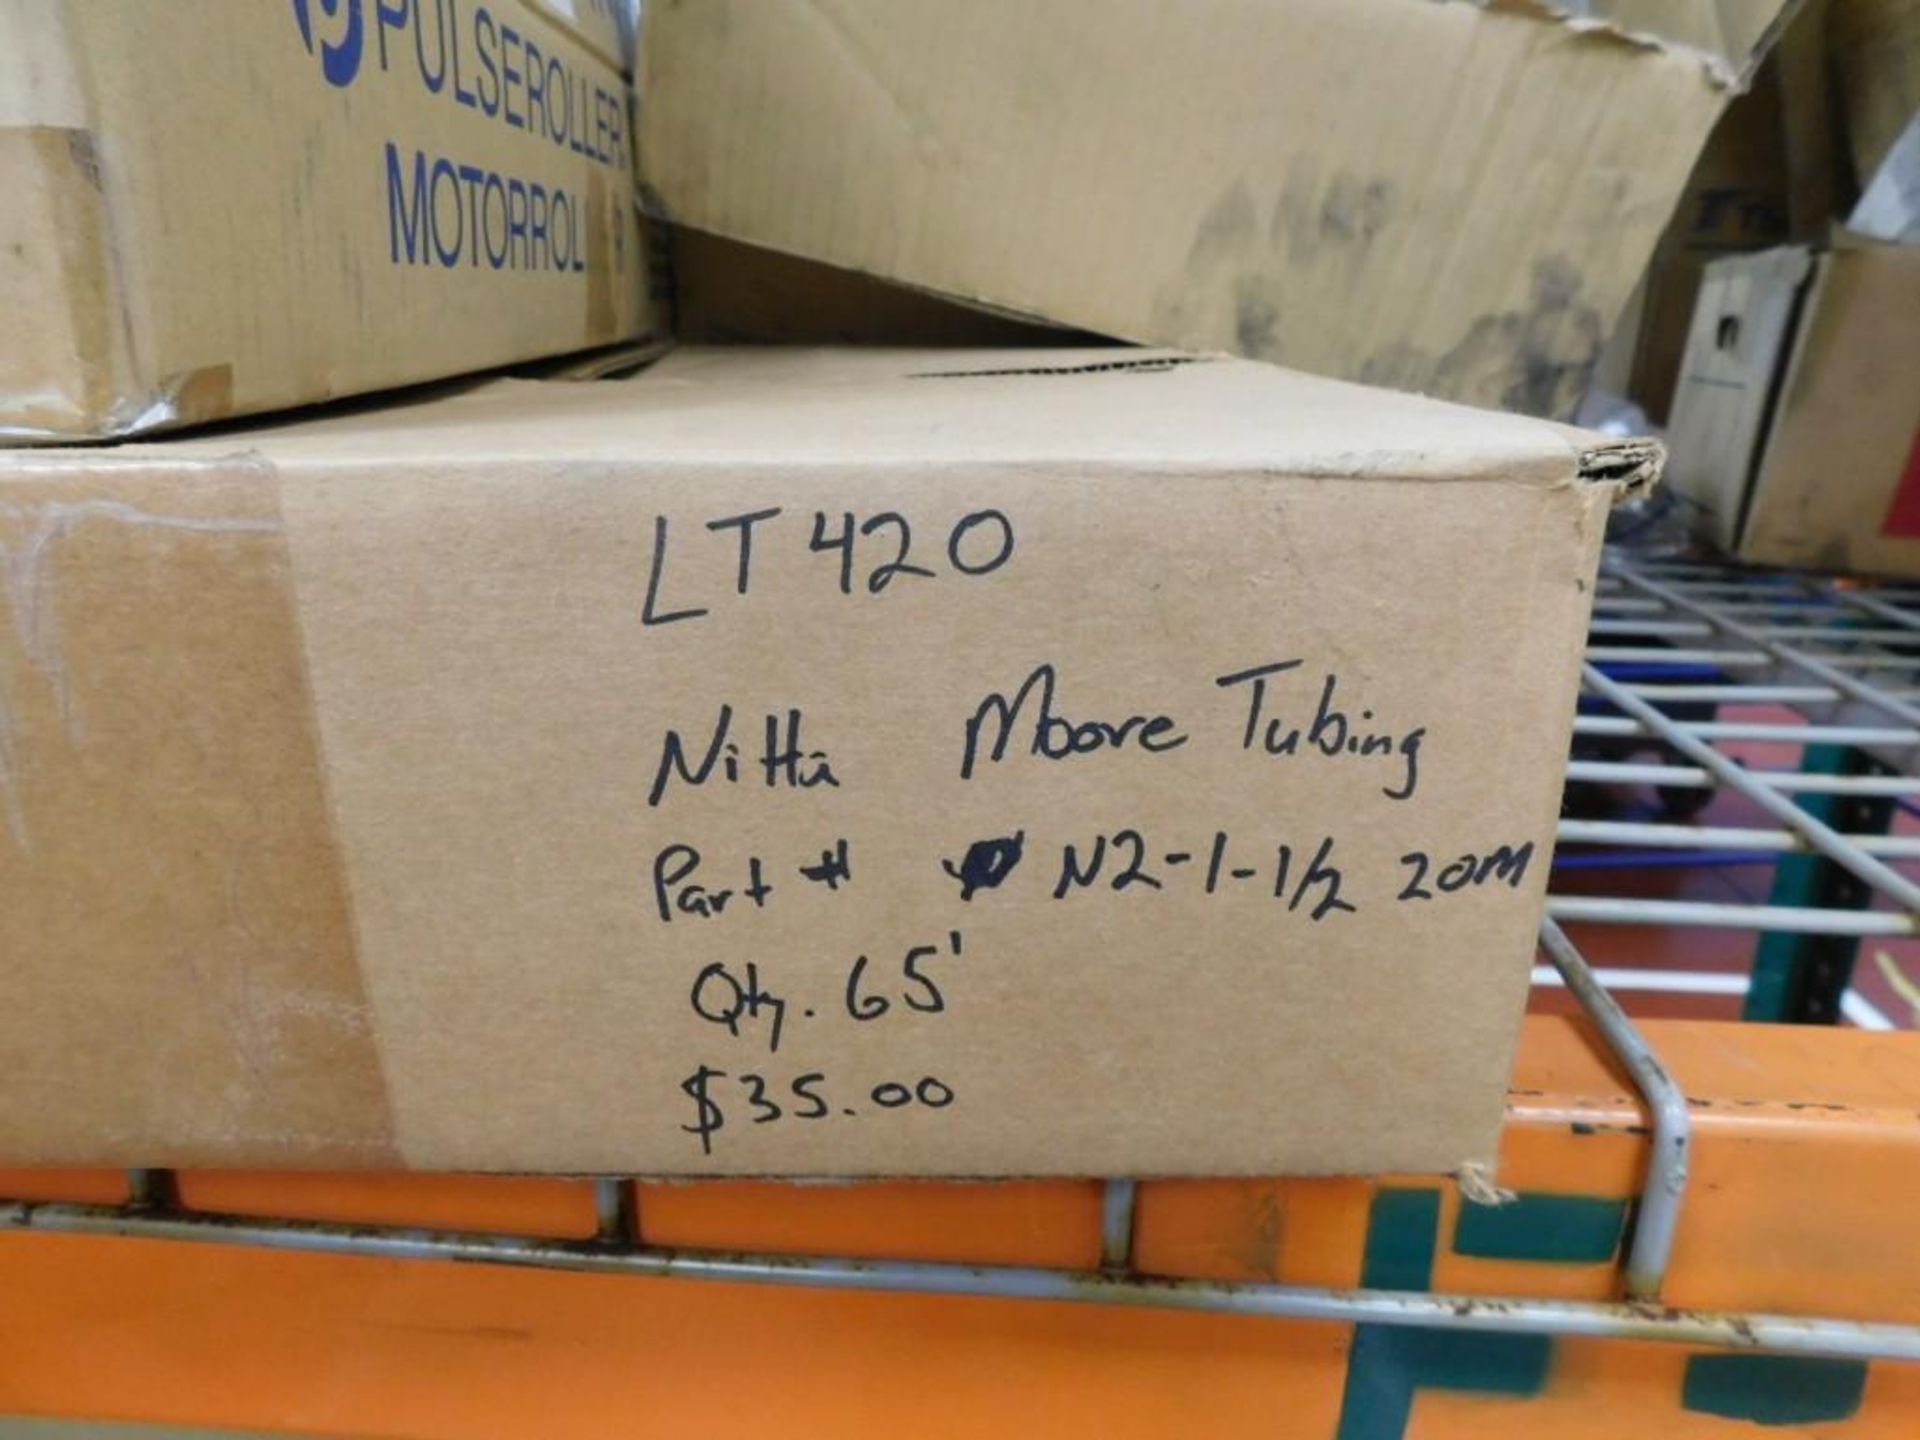 Contents Of Pallet Racking - Image 9 of 23